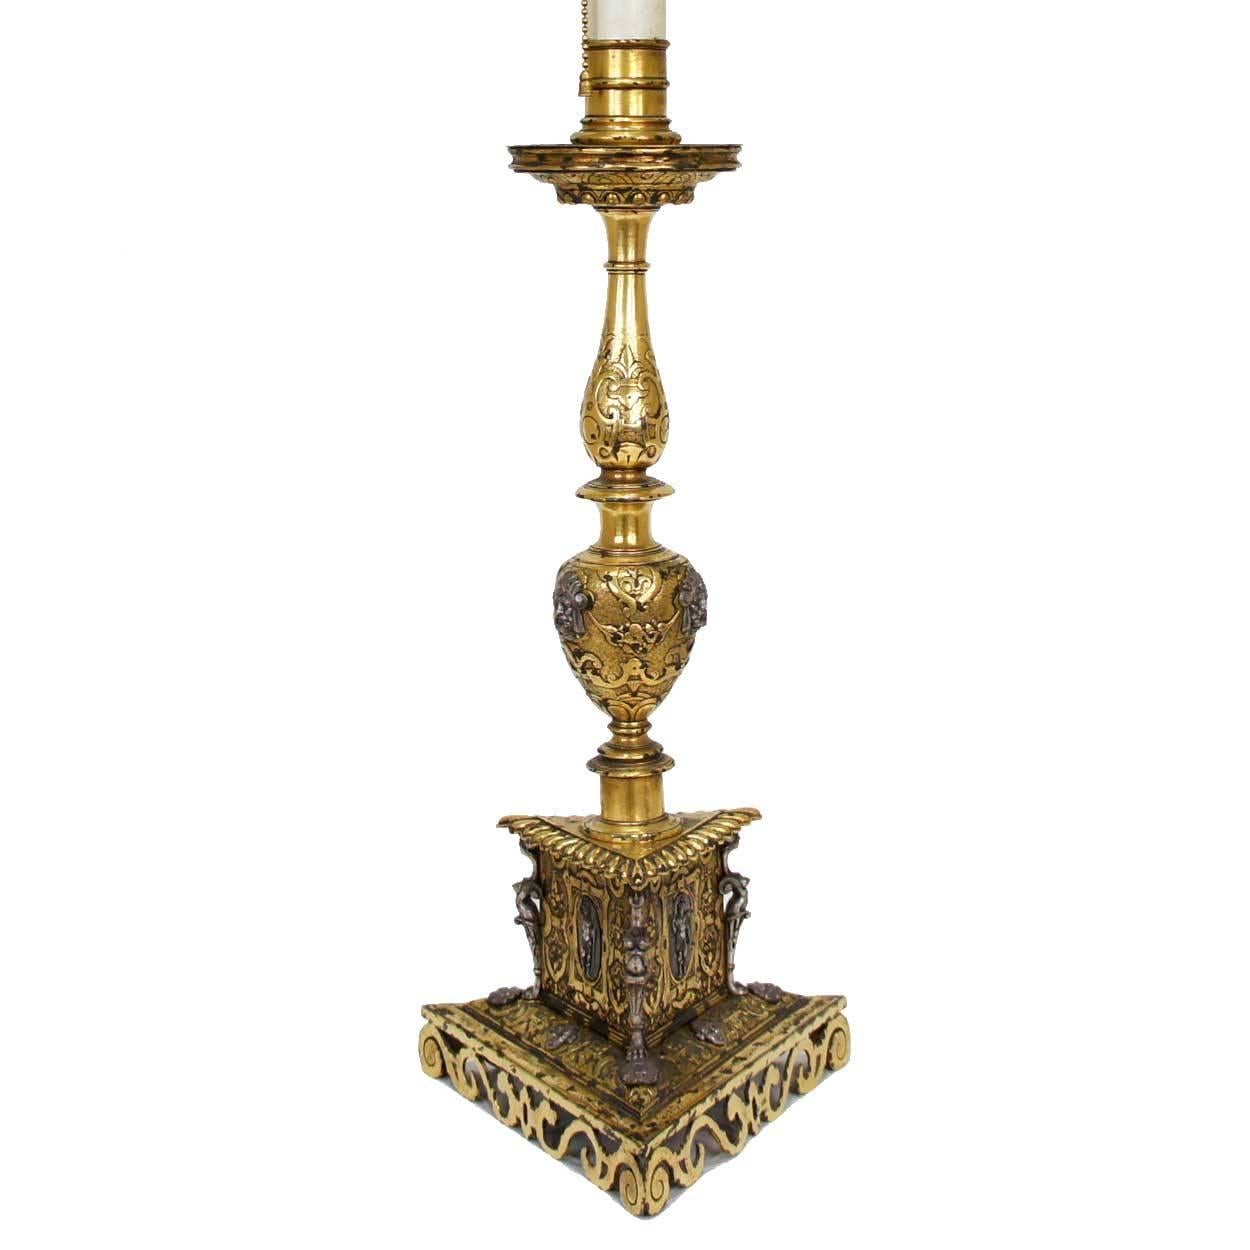 Inspired by the designs of 16th century Italy, this antique, candlestick lamp has a candle-cup and circular drip pan on a baluster turned standard and is raised on a stepped triangular base with a conforming pierced plinth. It is cast throughout